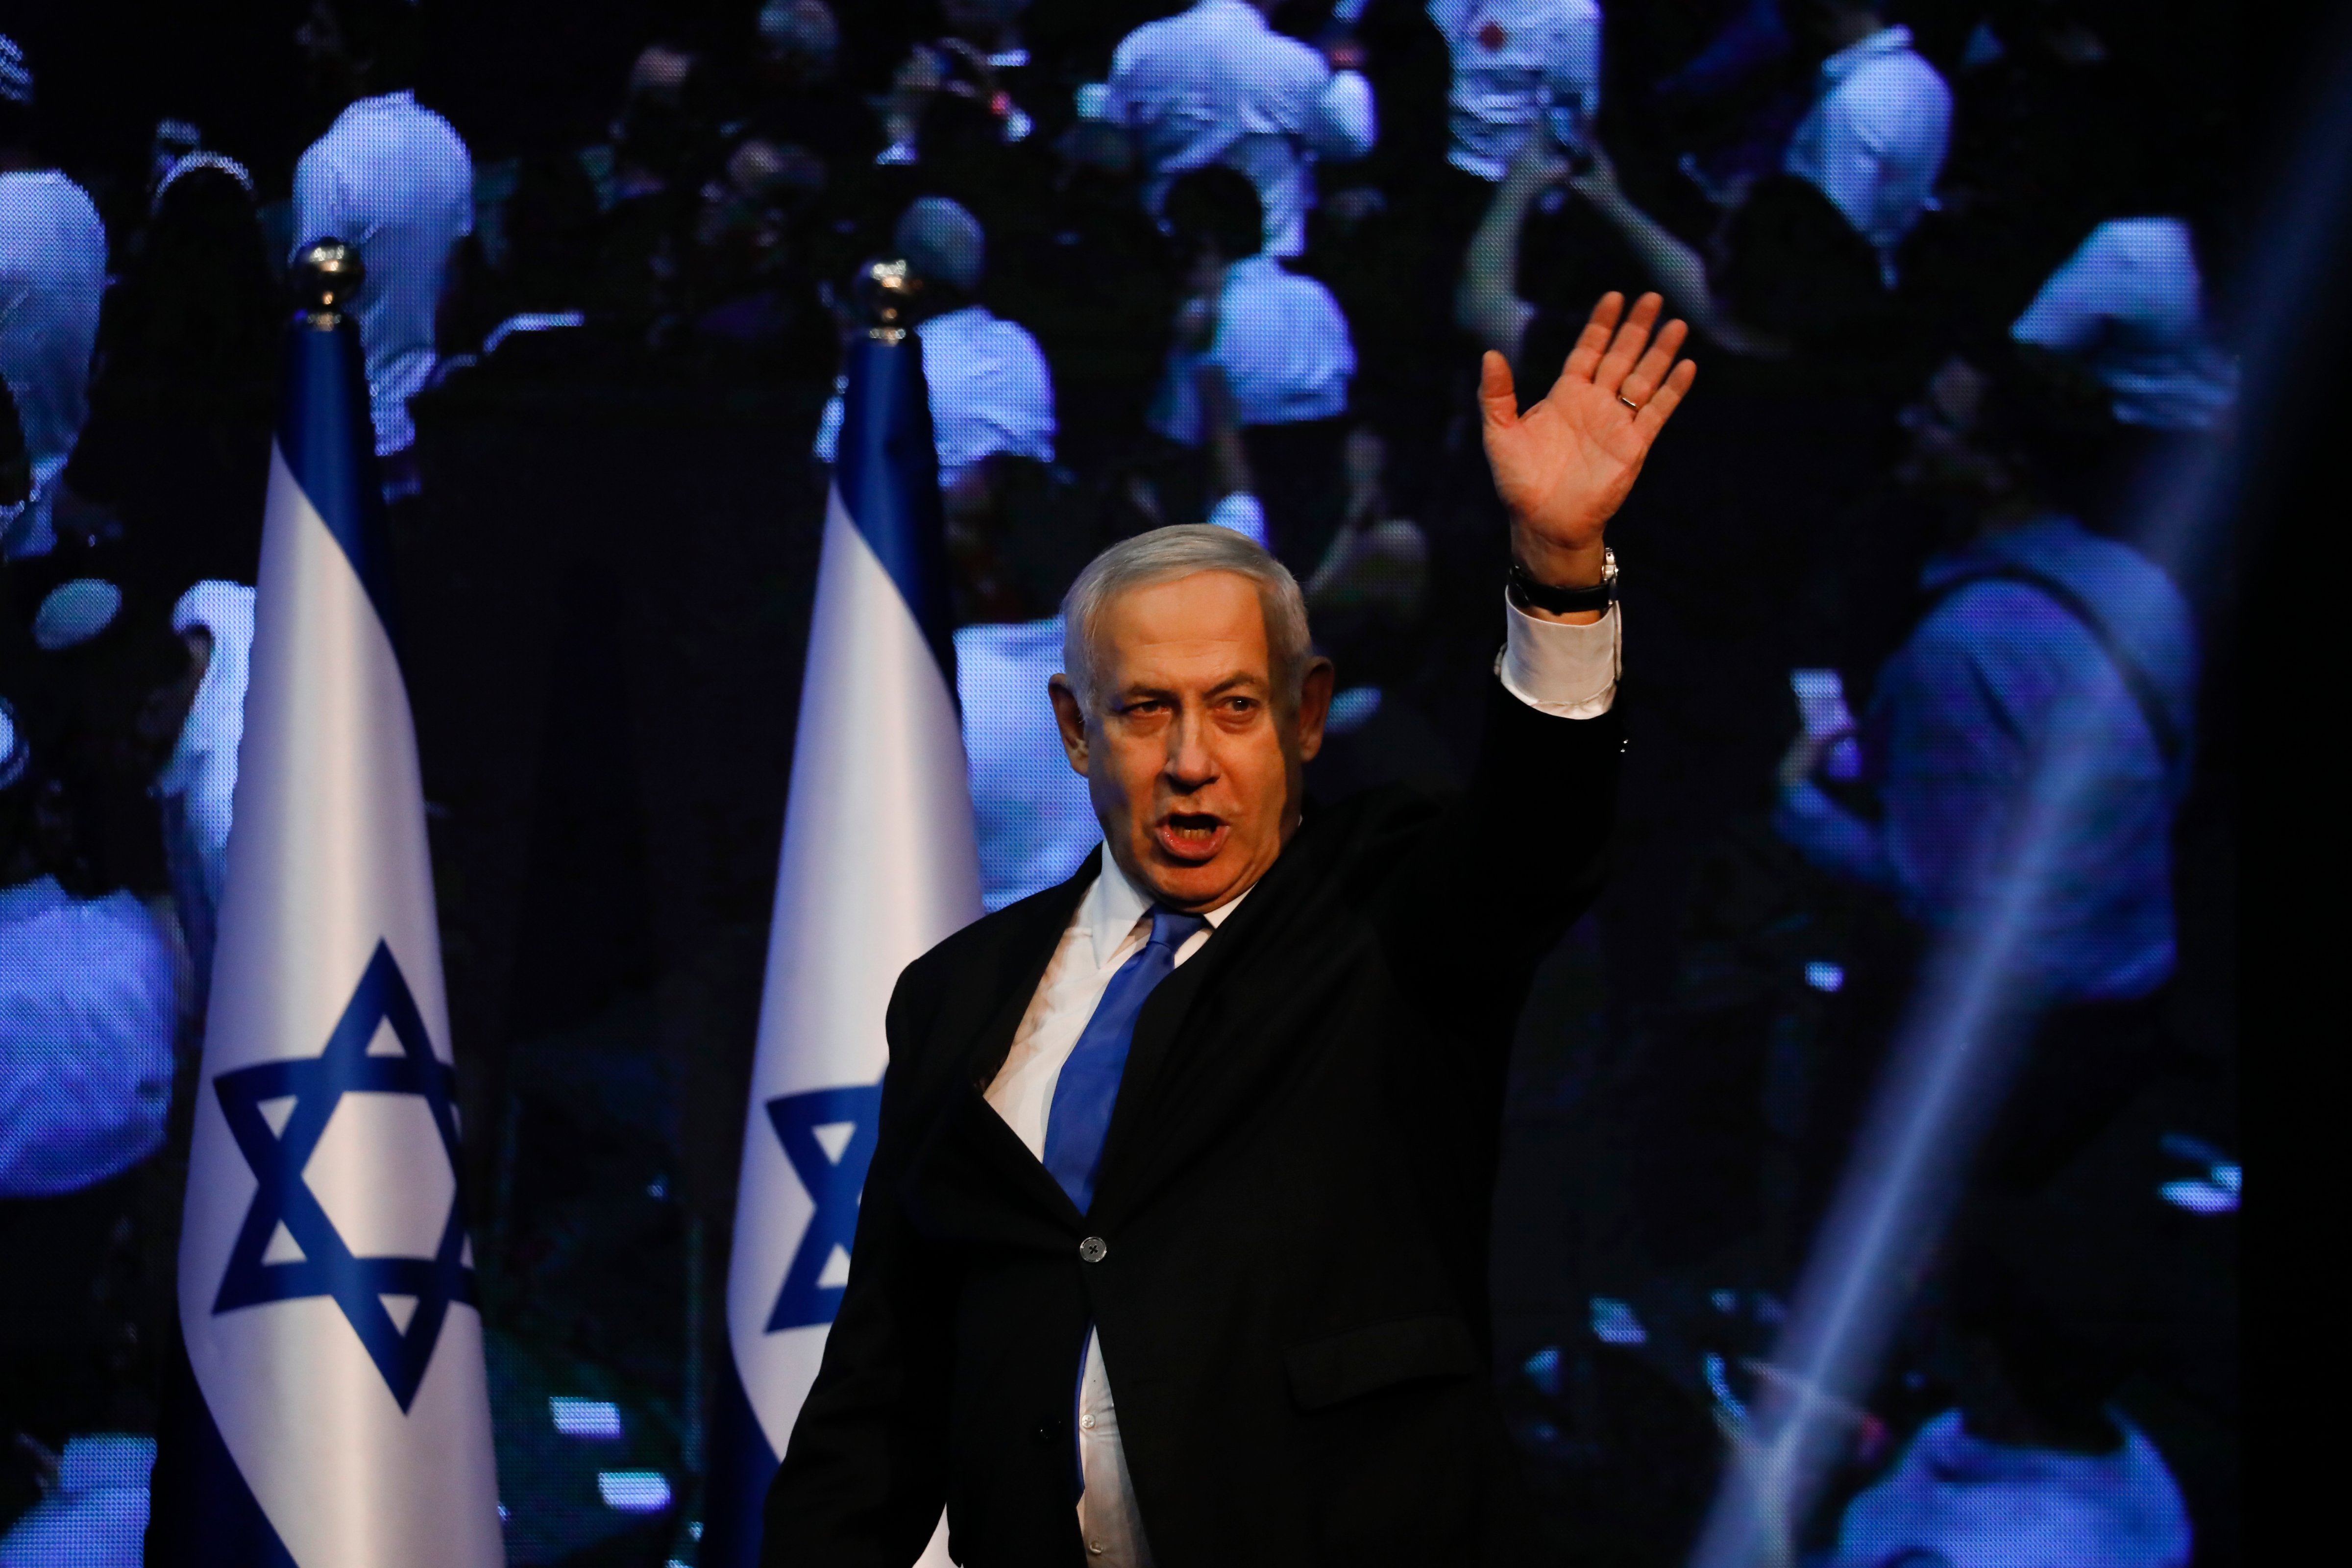 Israeli Prime Minister Benjamin Netanyahu addressees his supporters at party headquarters after elections in Tel Aviv, Israel, Wednesday, Sept. 18, 2019. (Ariel Schalit—AP)